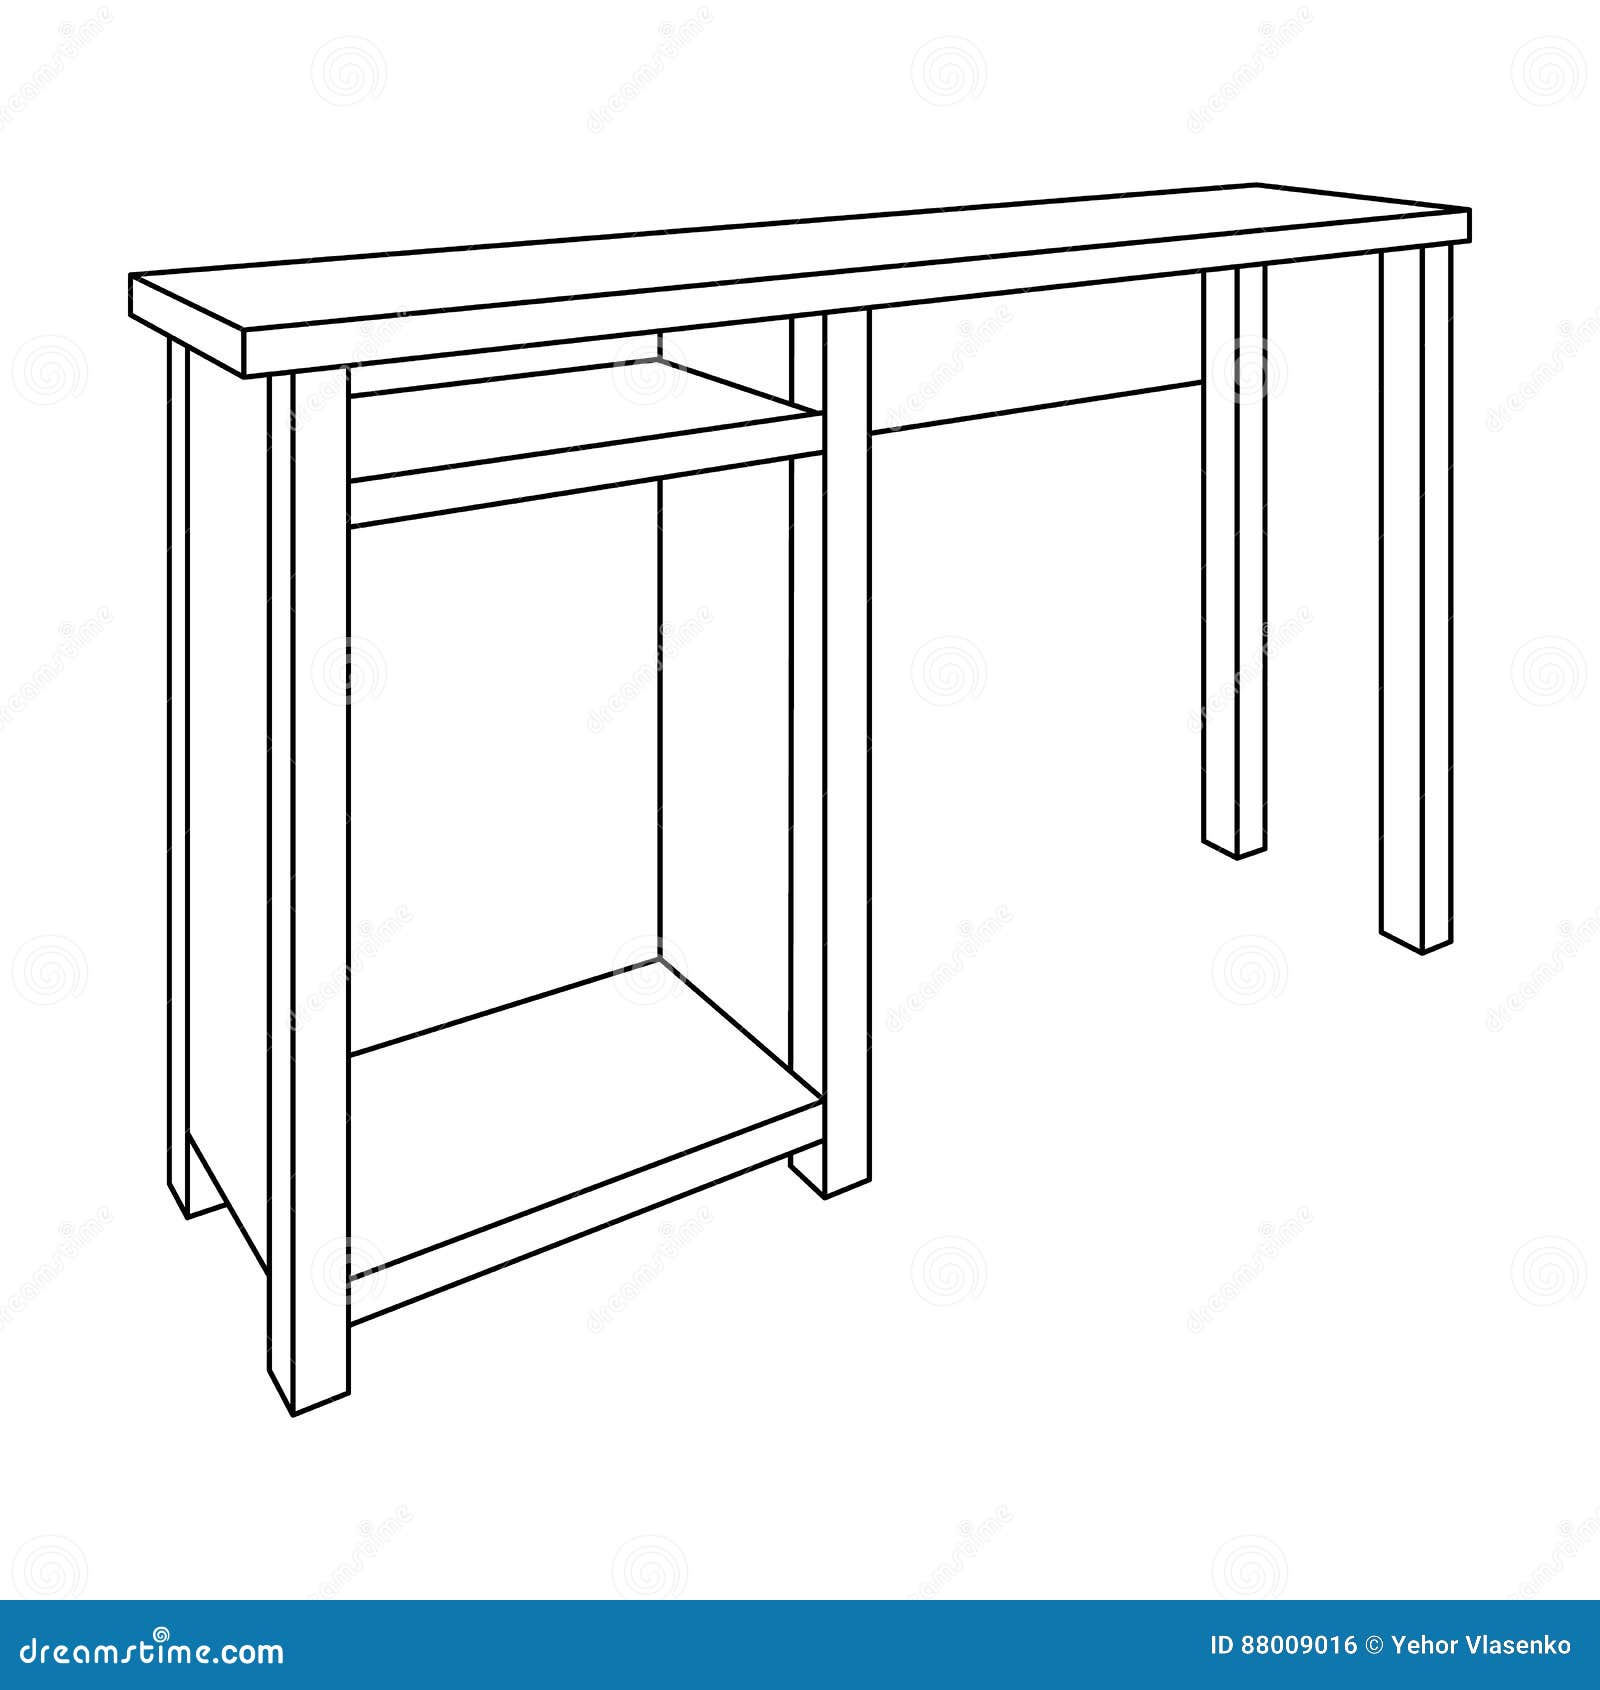 Wooden Table Legs Table For Drawing Pictures Table With Drawers